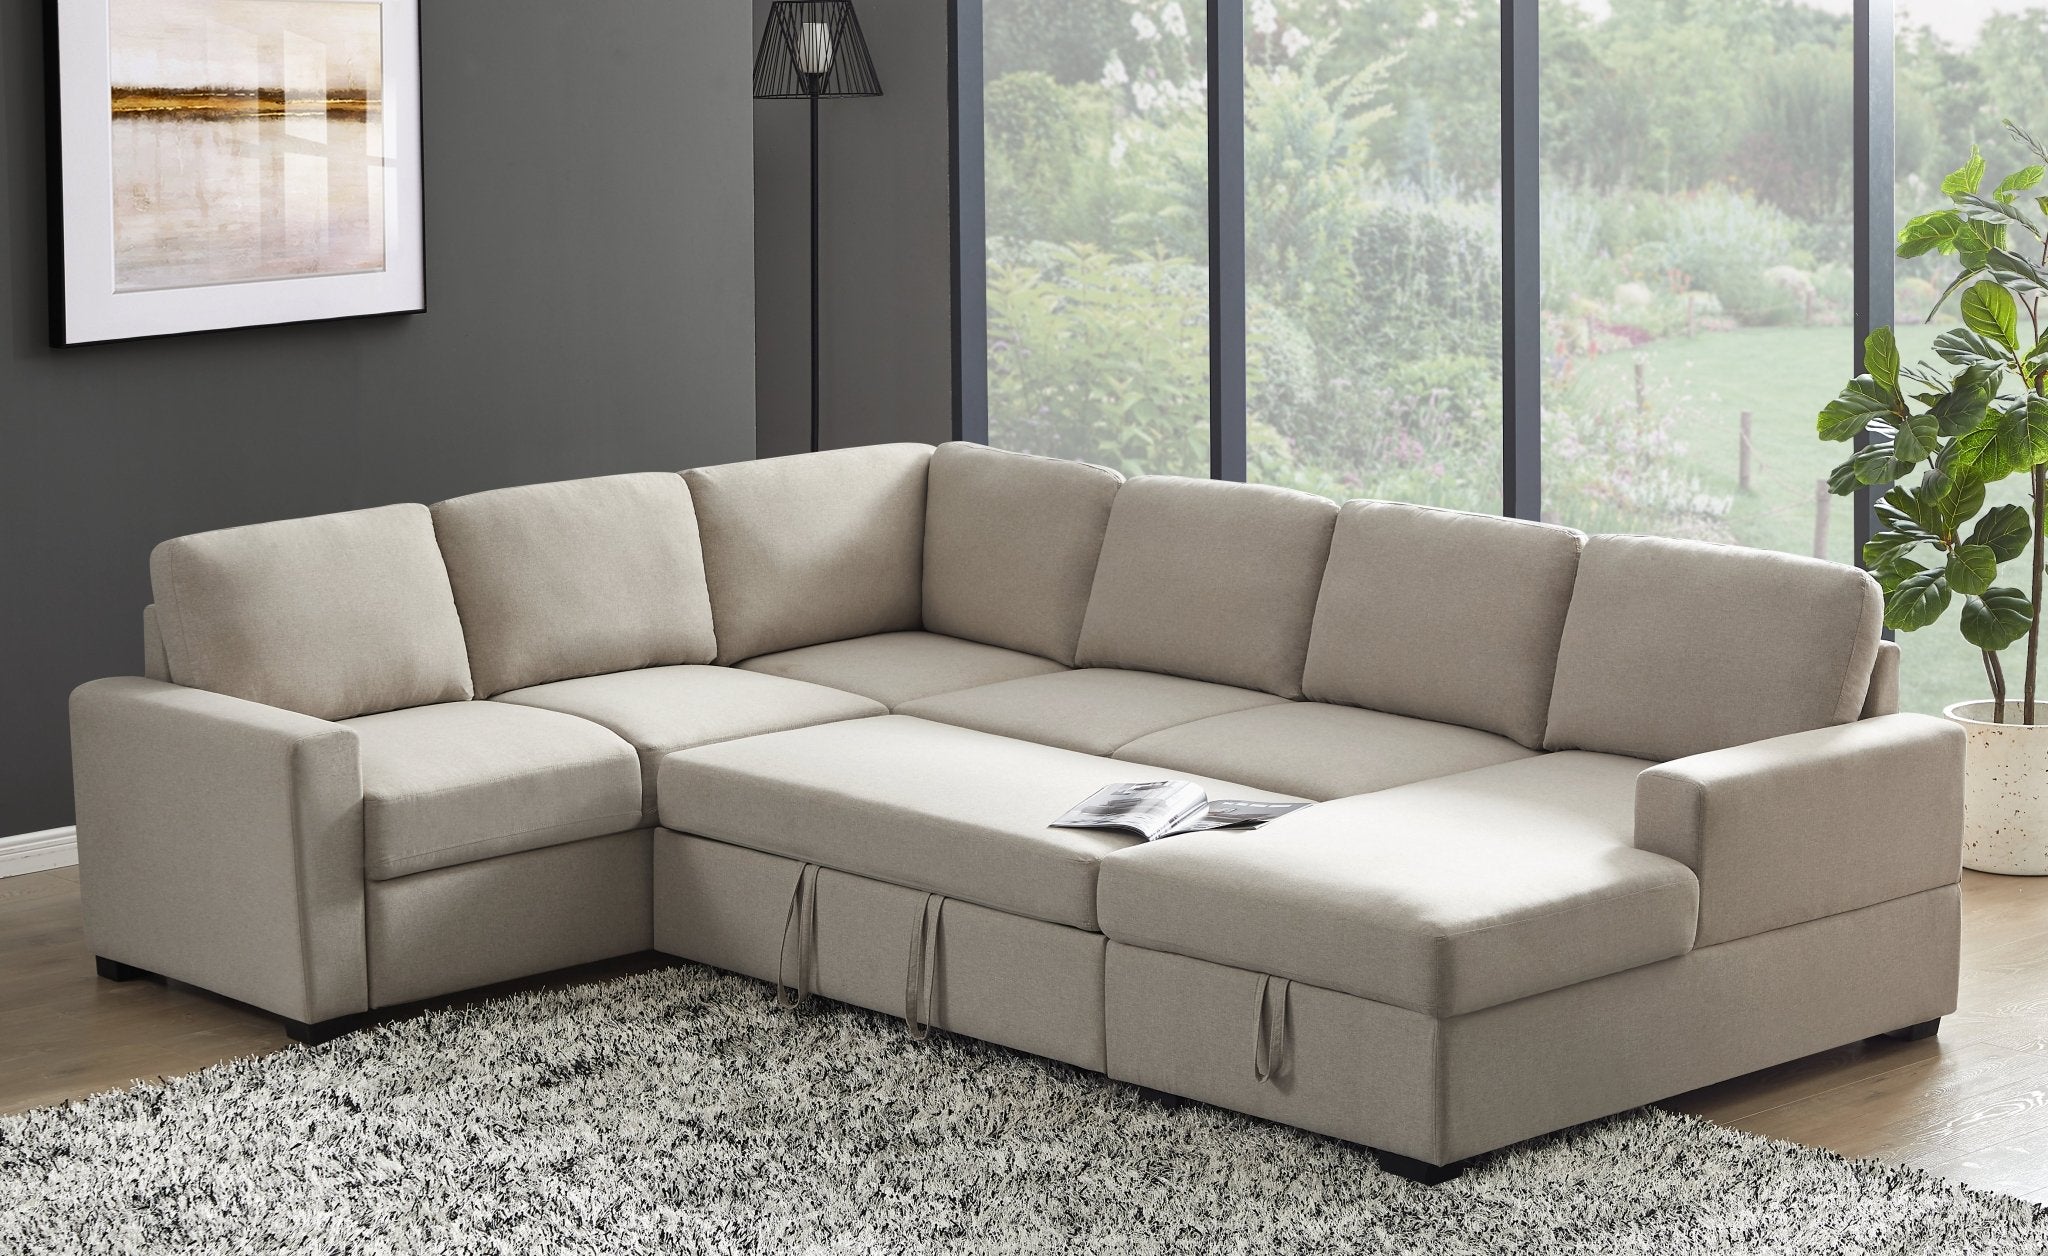 Celestial 4 Piece Sectional Sofa Set with Right Facing Chaise - Sofas